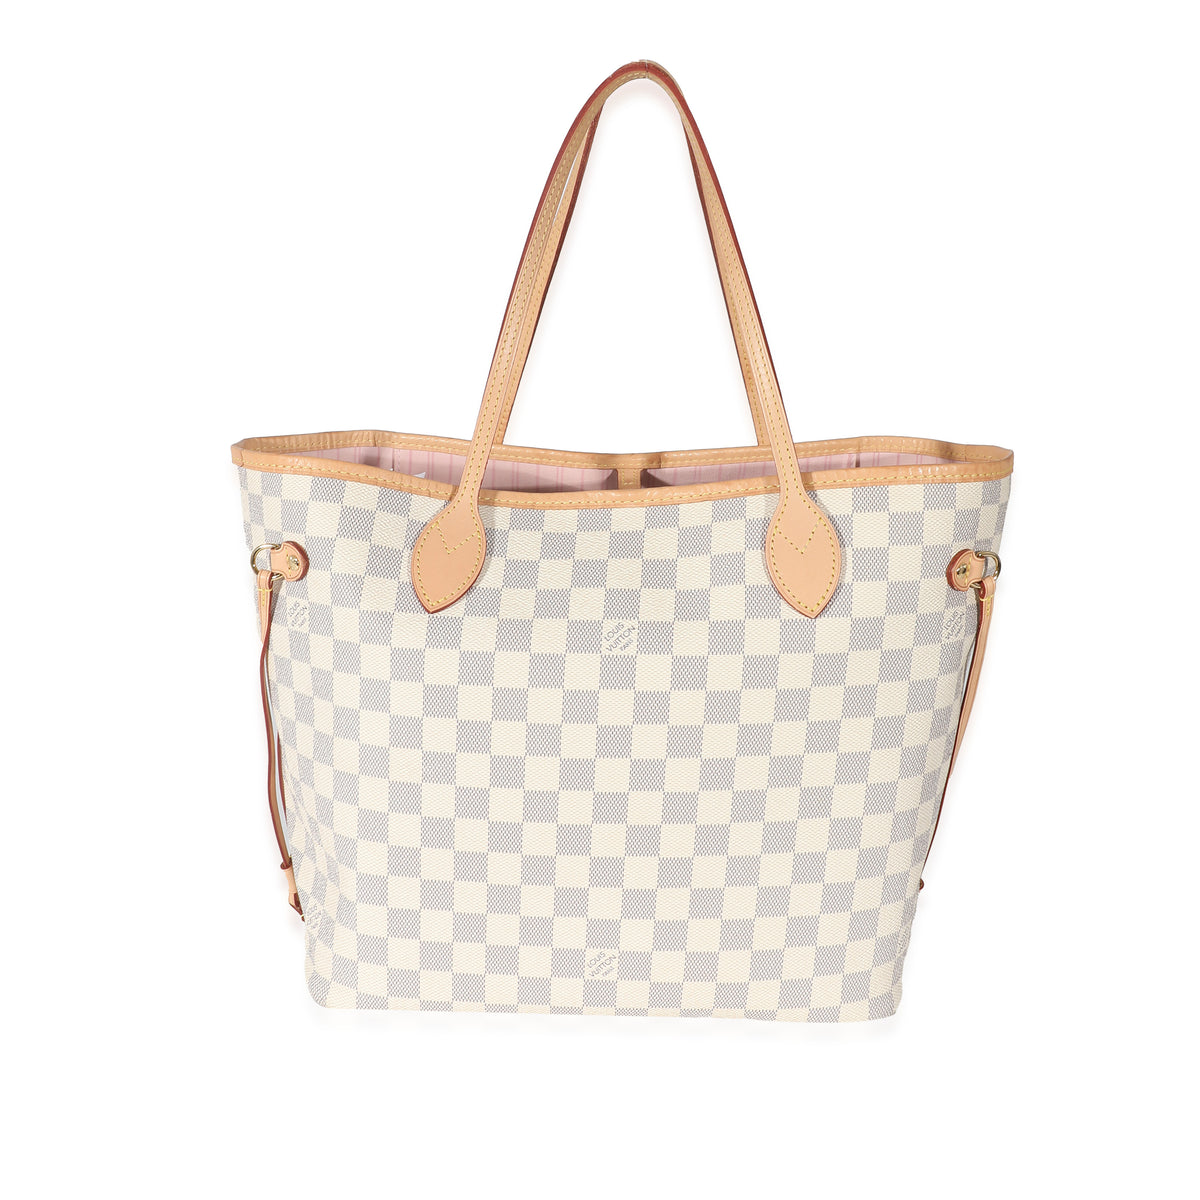 LOUIS VUITTON Neverfull MM Damier Azur Tote Bag White- 10% OFF